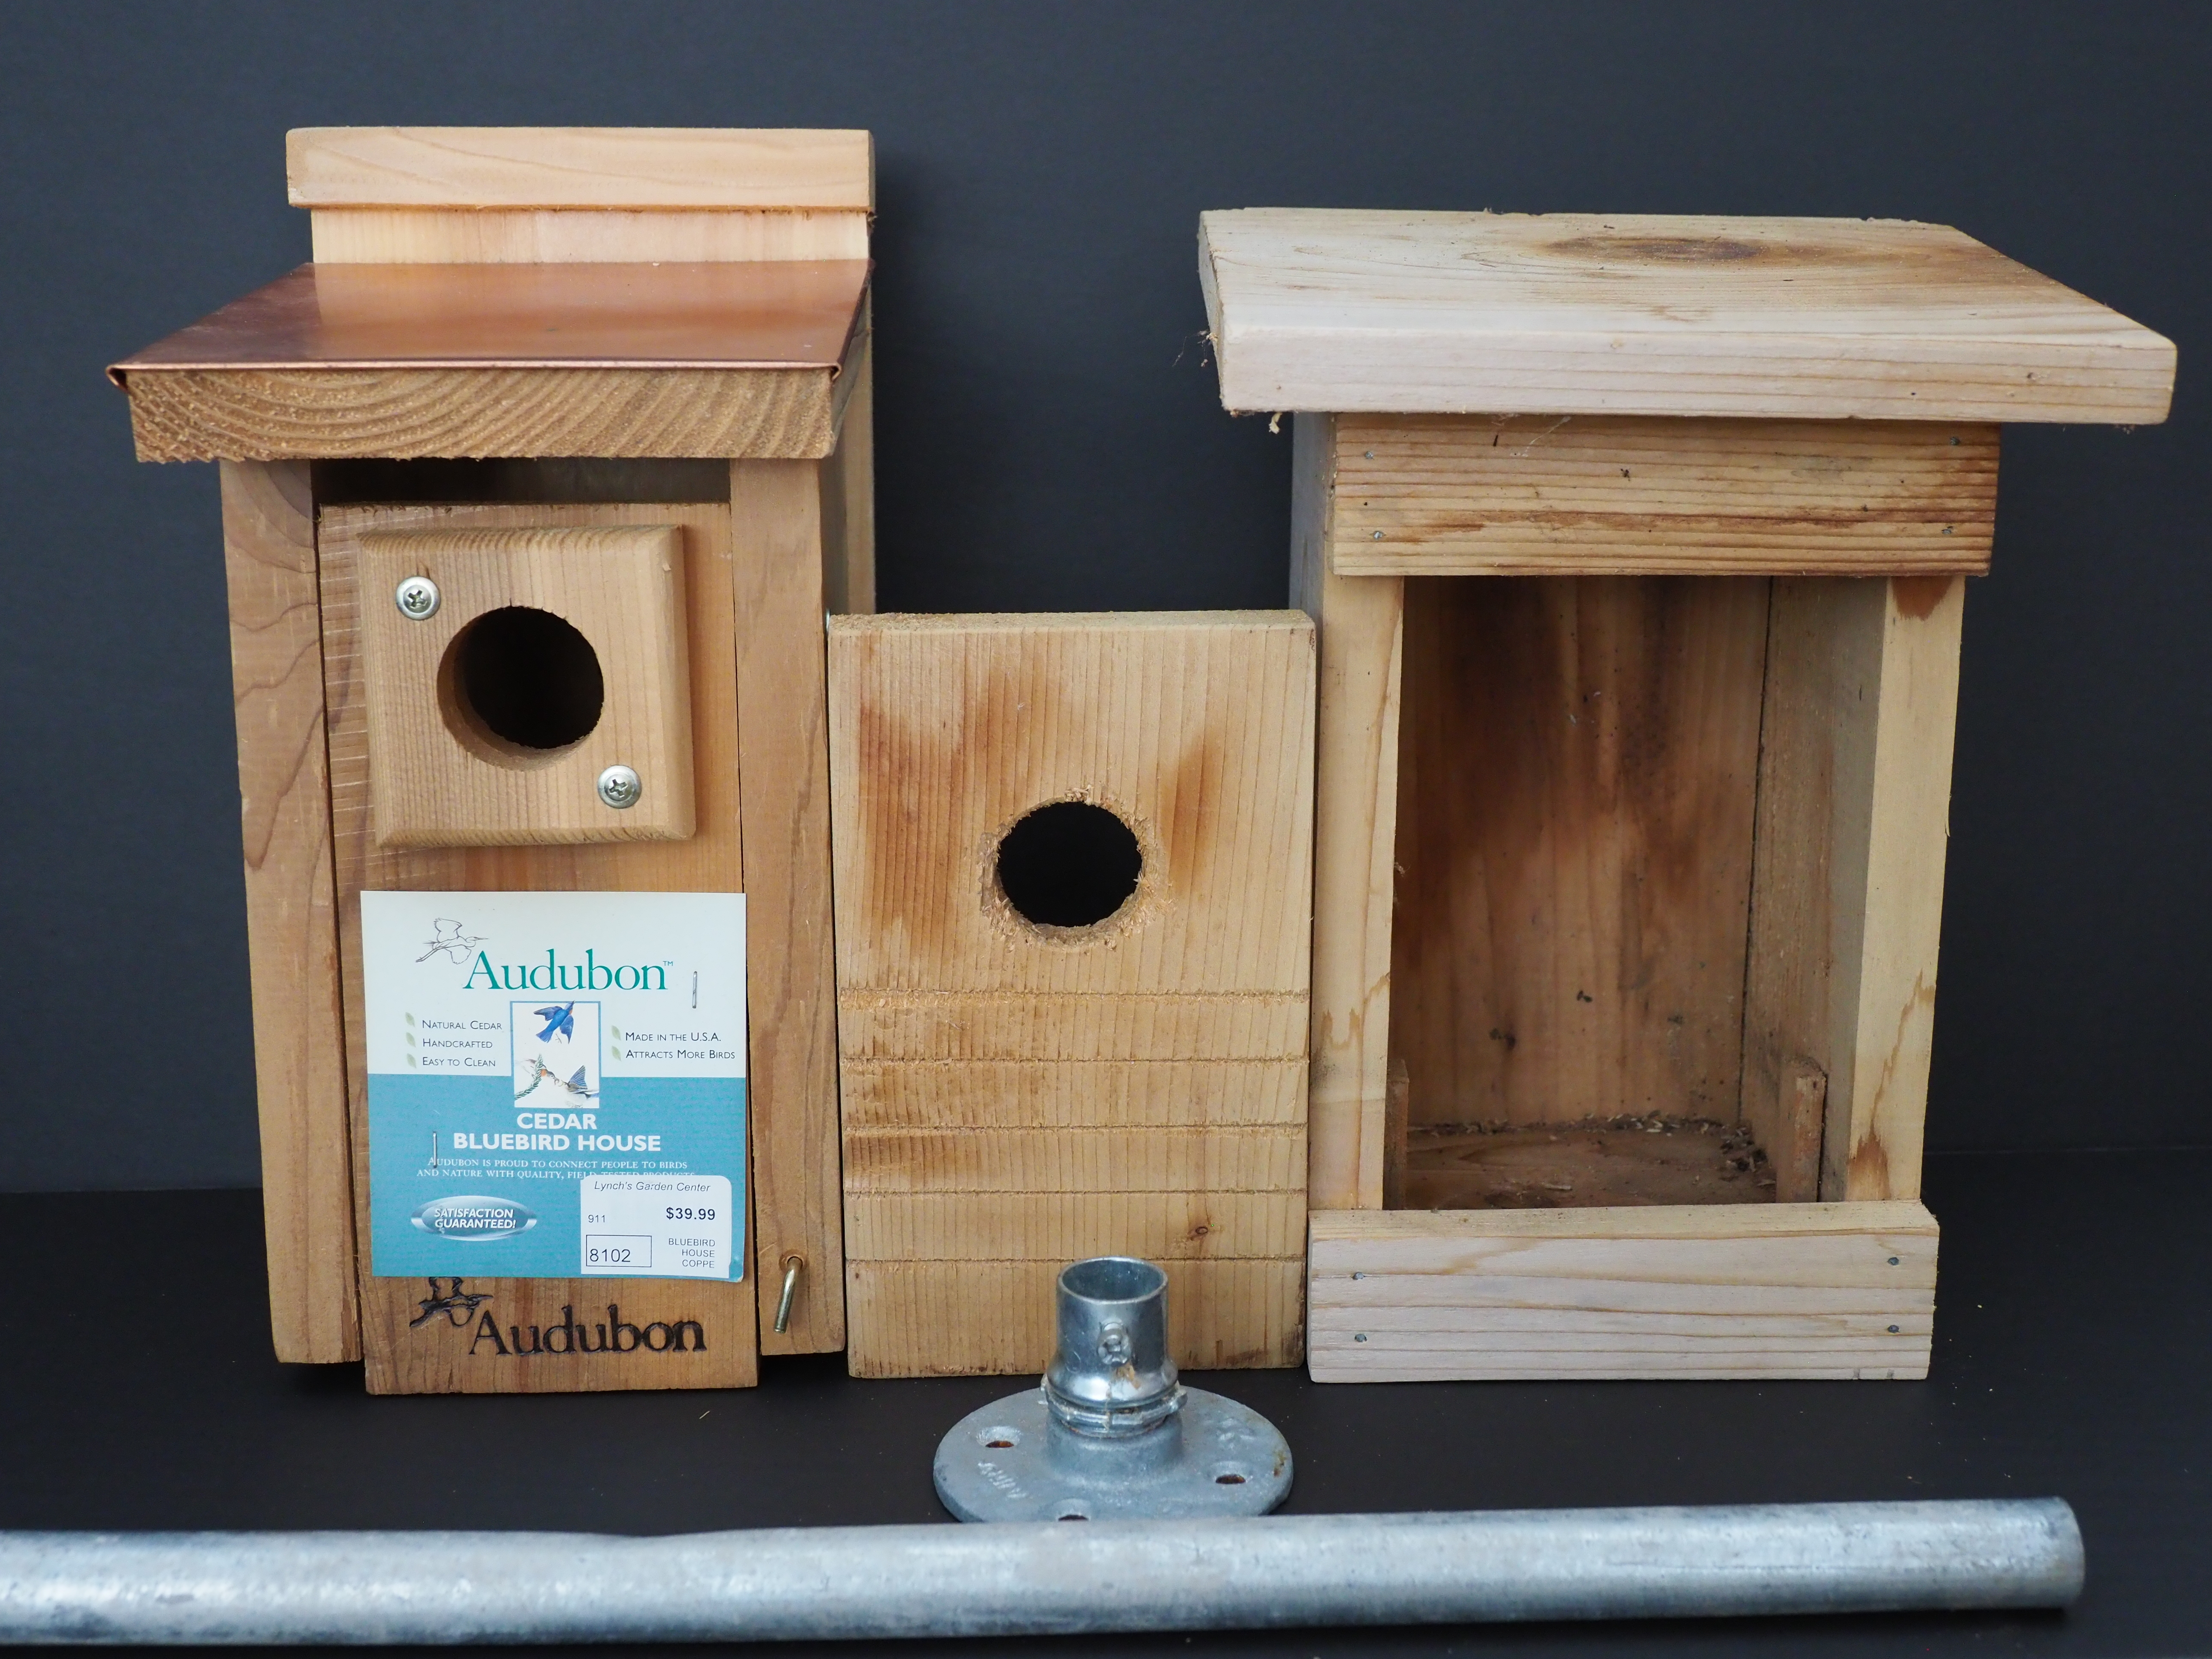 An Audubon-branded bluebird nesting box on the left and a homemade box on the right. The wood section in the center (reversed) shows the kerf cuts that allow the fledgling chick to climb up the wood when ready to leave the nest. The Audubon box does not have the kerf cuts and the copper covering on the top makes it too slippery for the birds to perch on top. The flange (bottom center) is attached with small bolts to the bottom of the box and the protruding connector allows easy mounting onto the EMT pipe. A simple set screw in the flange allows for easy removal of the entire box for repairs and cleaning.  The Audubon box is much heavier than the home made box and may not be supported by the EMT pipe. ANDREW MESSINGER